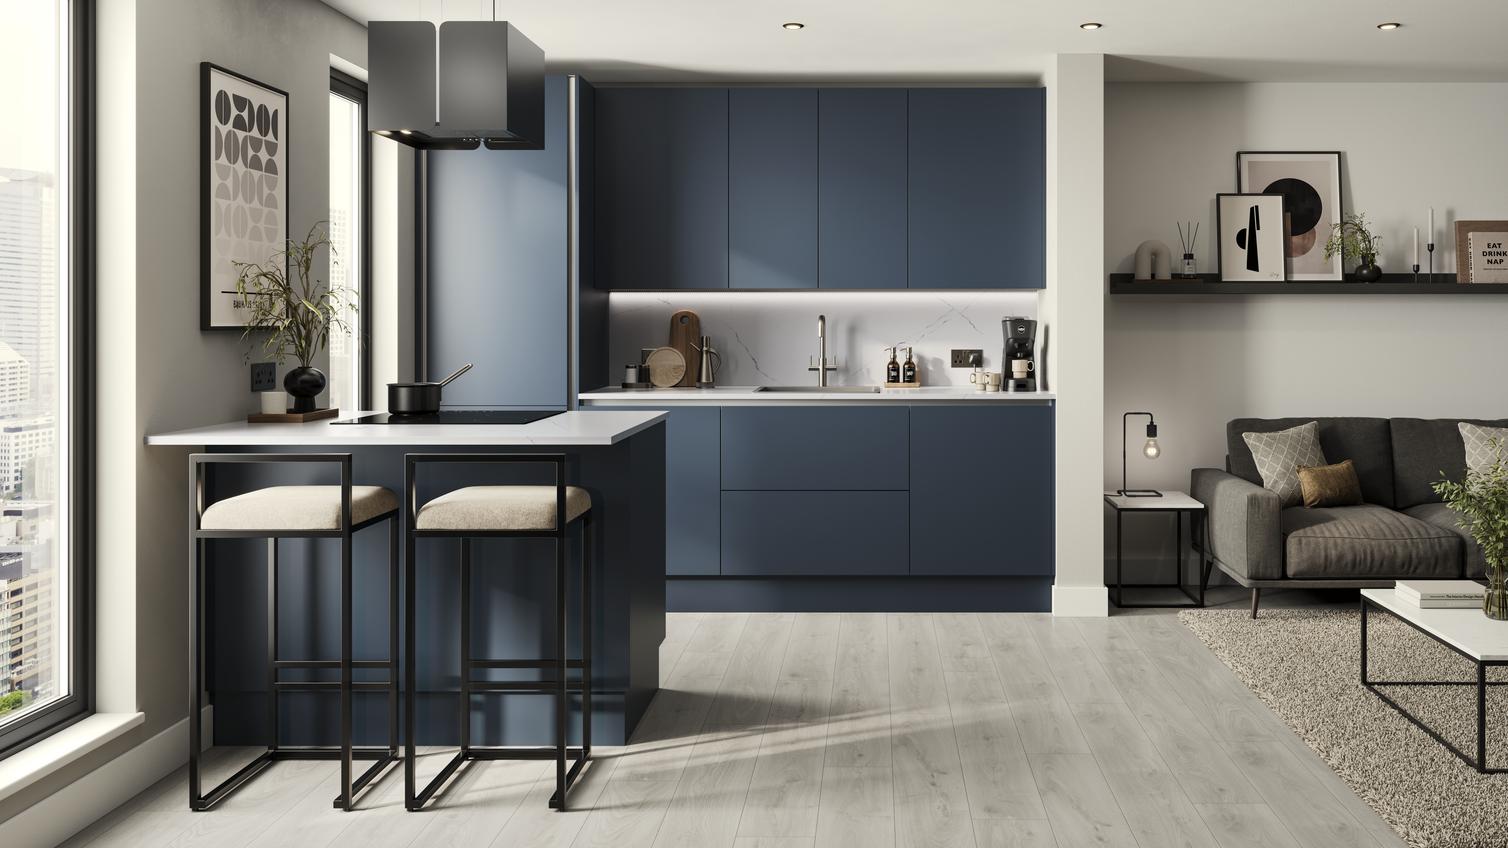 A marine blue kitchen with handleless cabinet doors. It is in a one-wall layout with a breakfast bar and grey oak flooring.